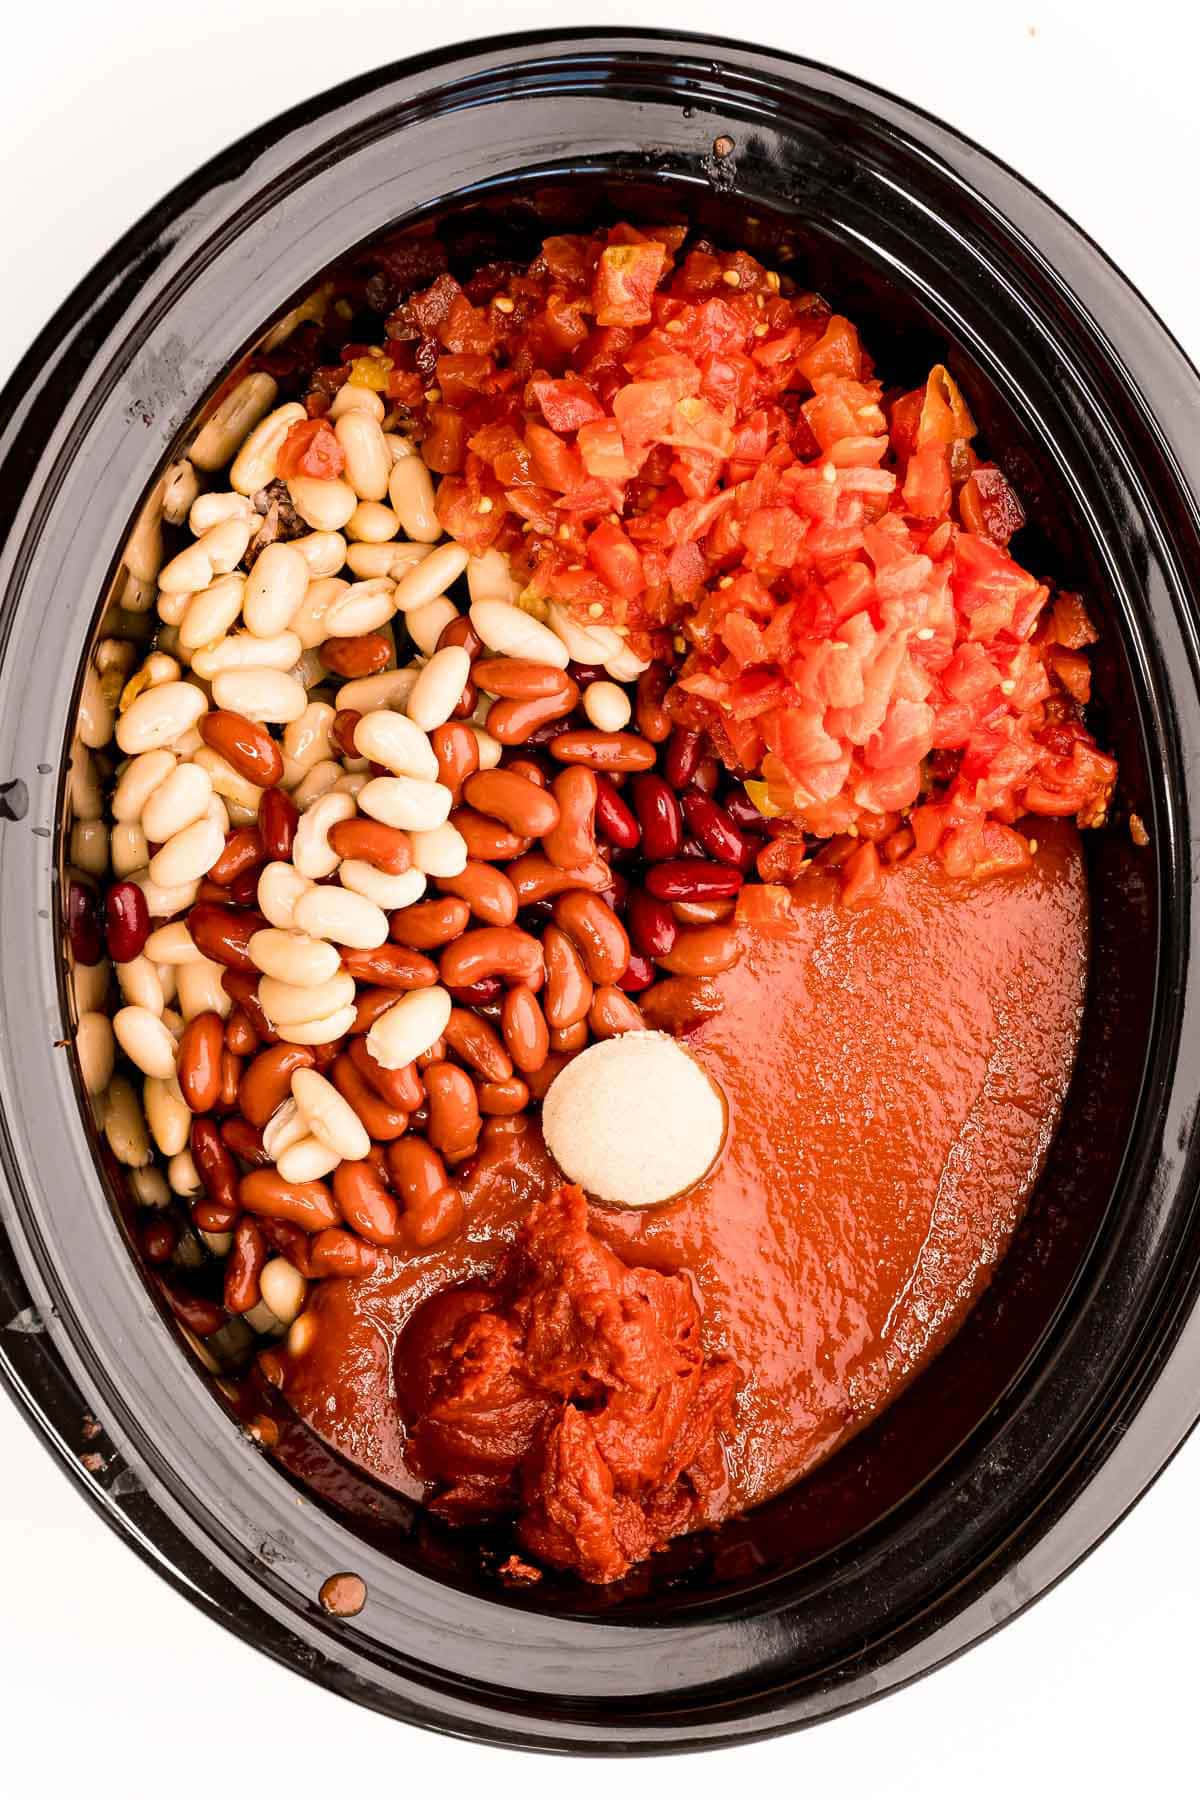 Add diced tomatoes, tomato sauce, tomato paste, beans, and beef stock to the slow cooker